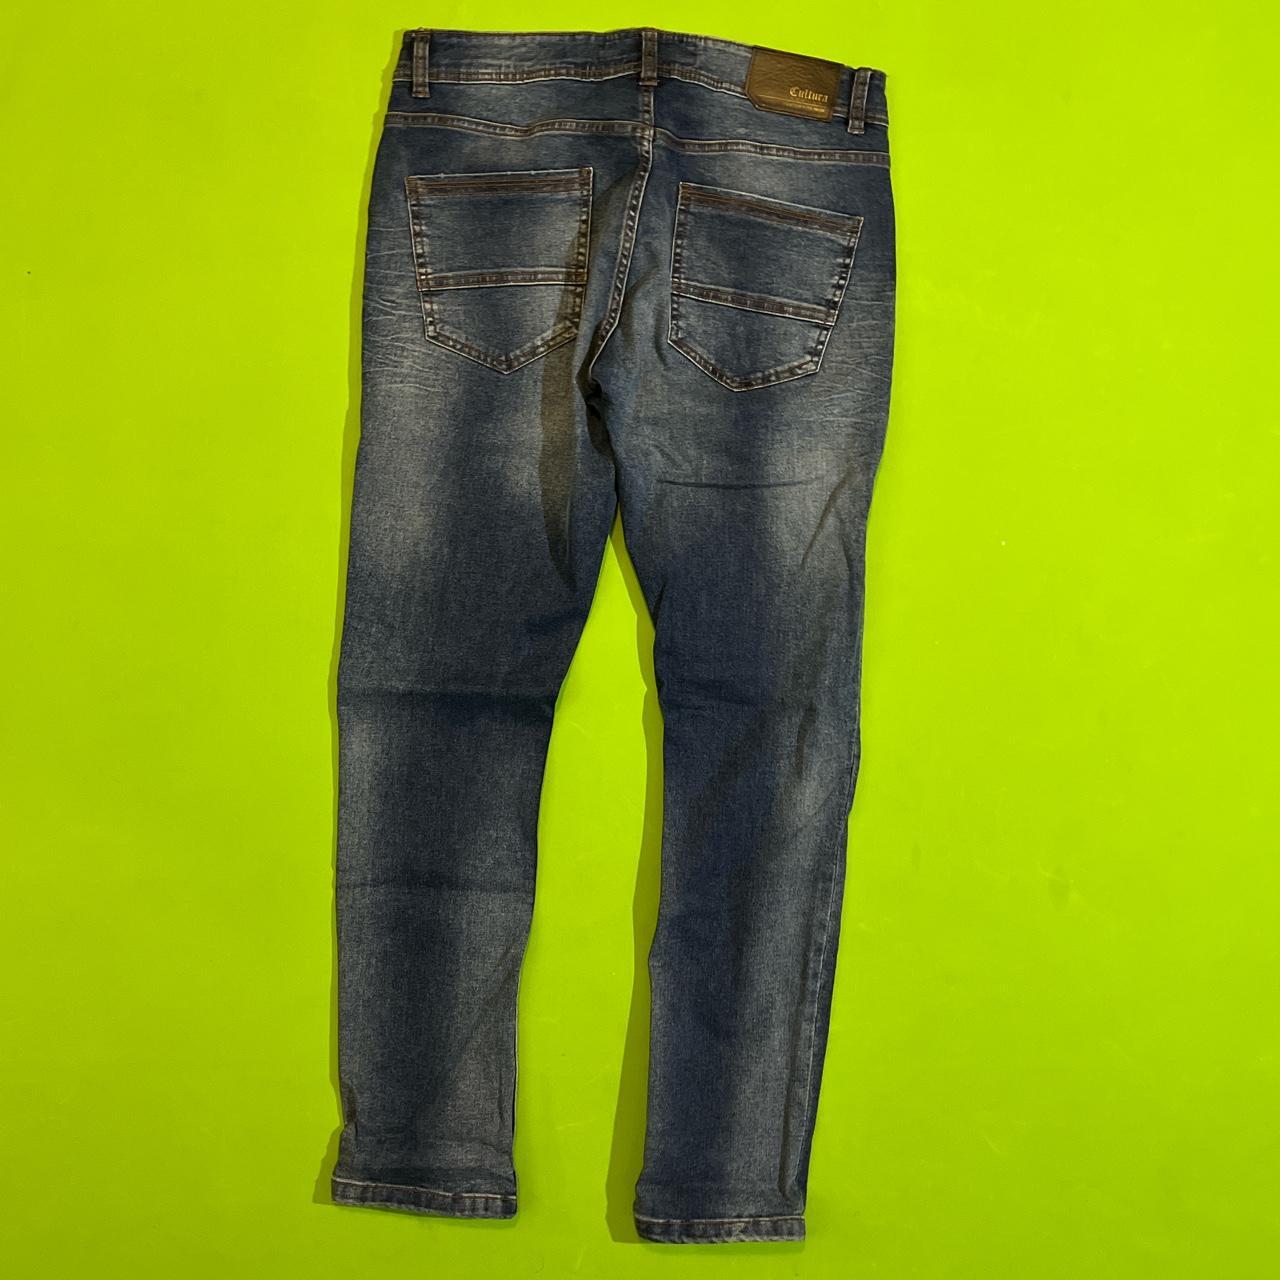 Cultura Men's Blue and Brown Jeans